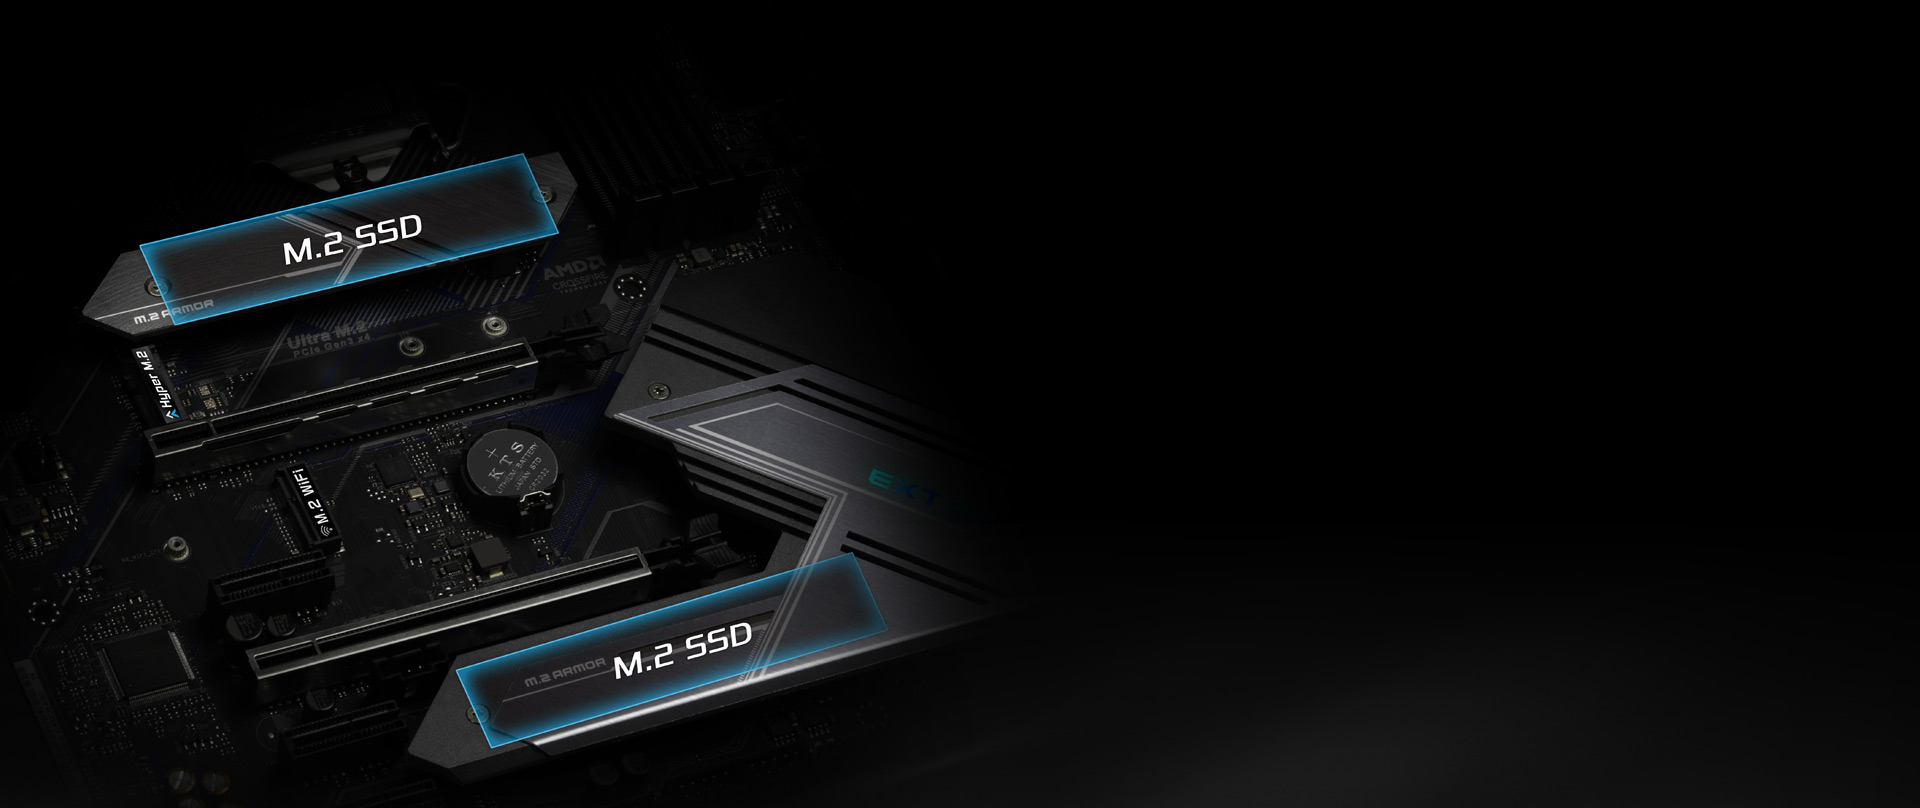 DualM2-SSD-Z490 Extreme4 PERFORMER of the motherboard